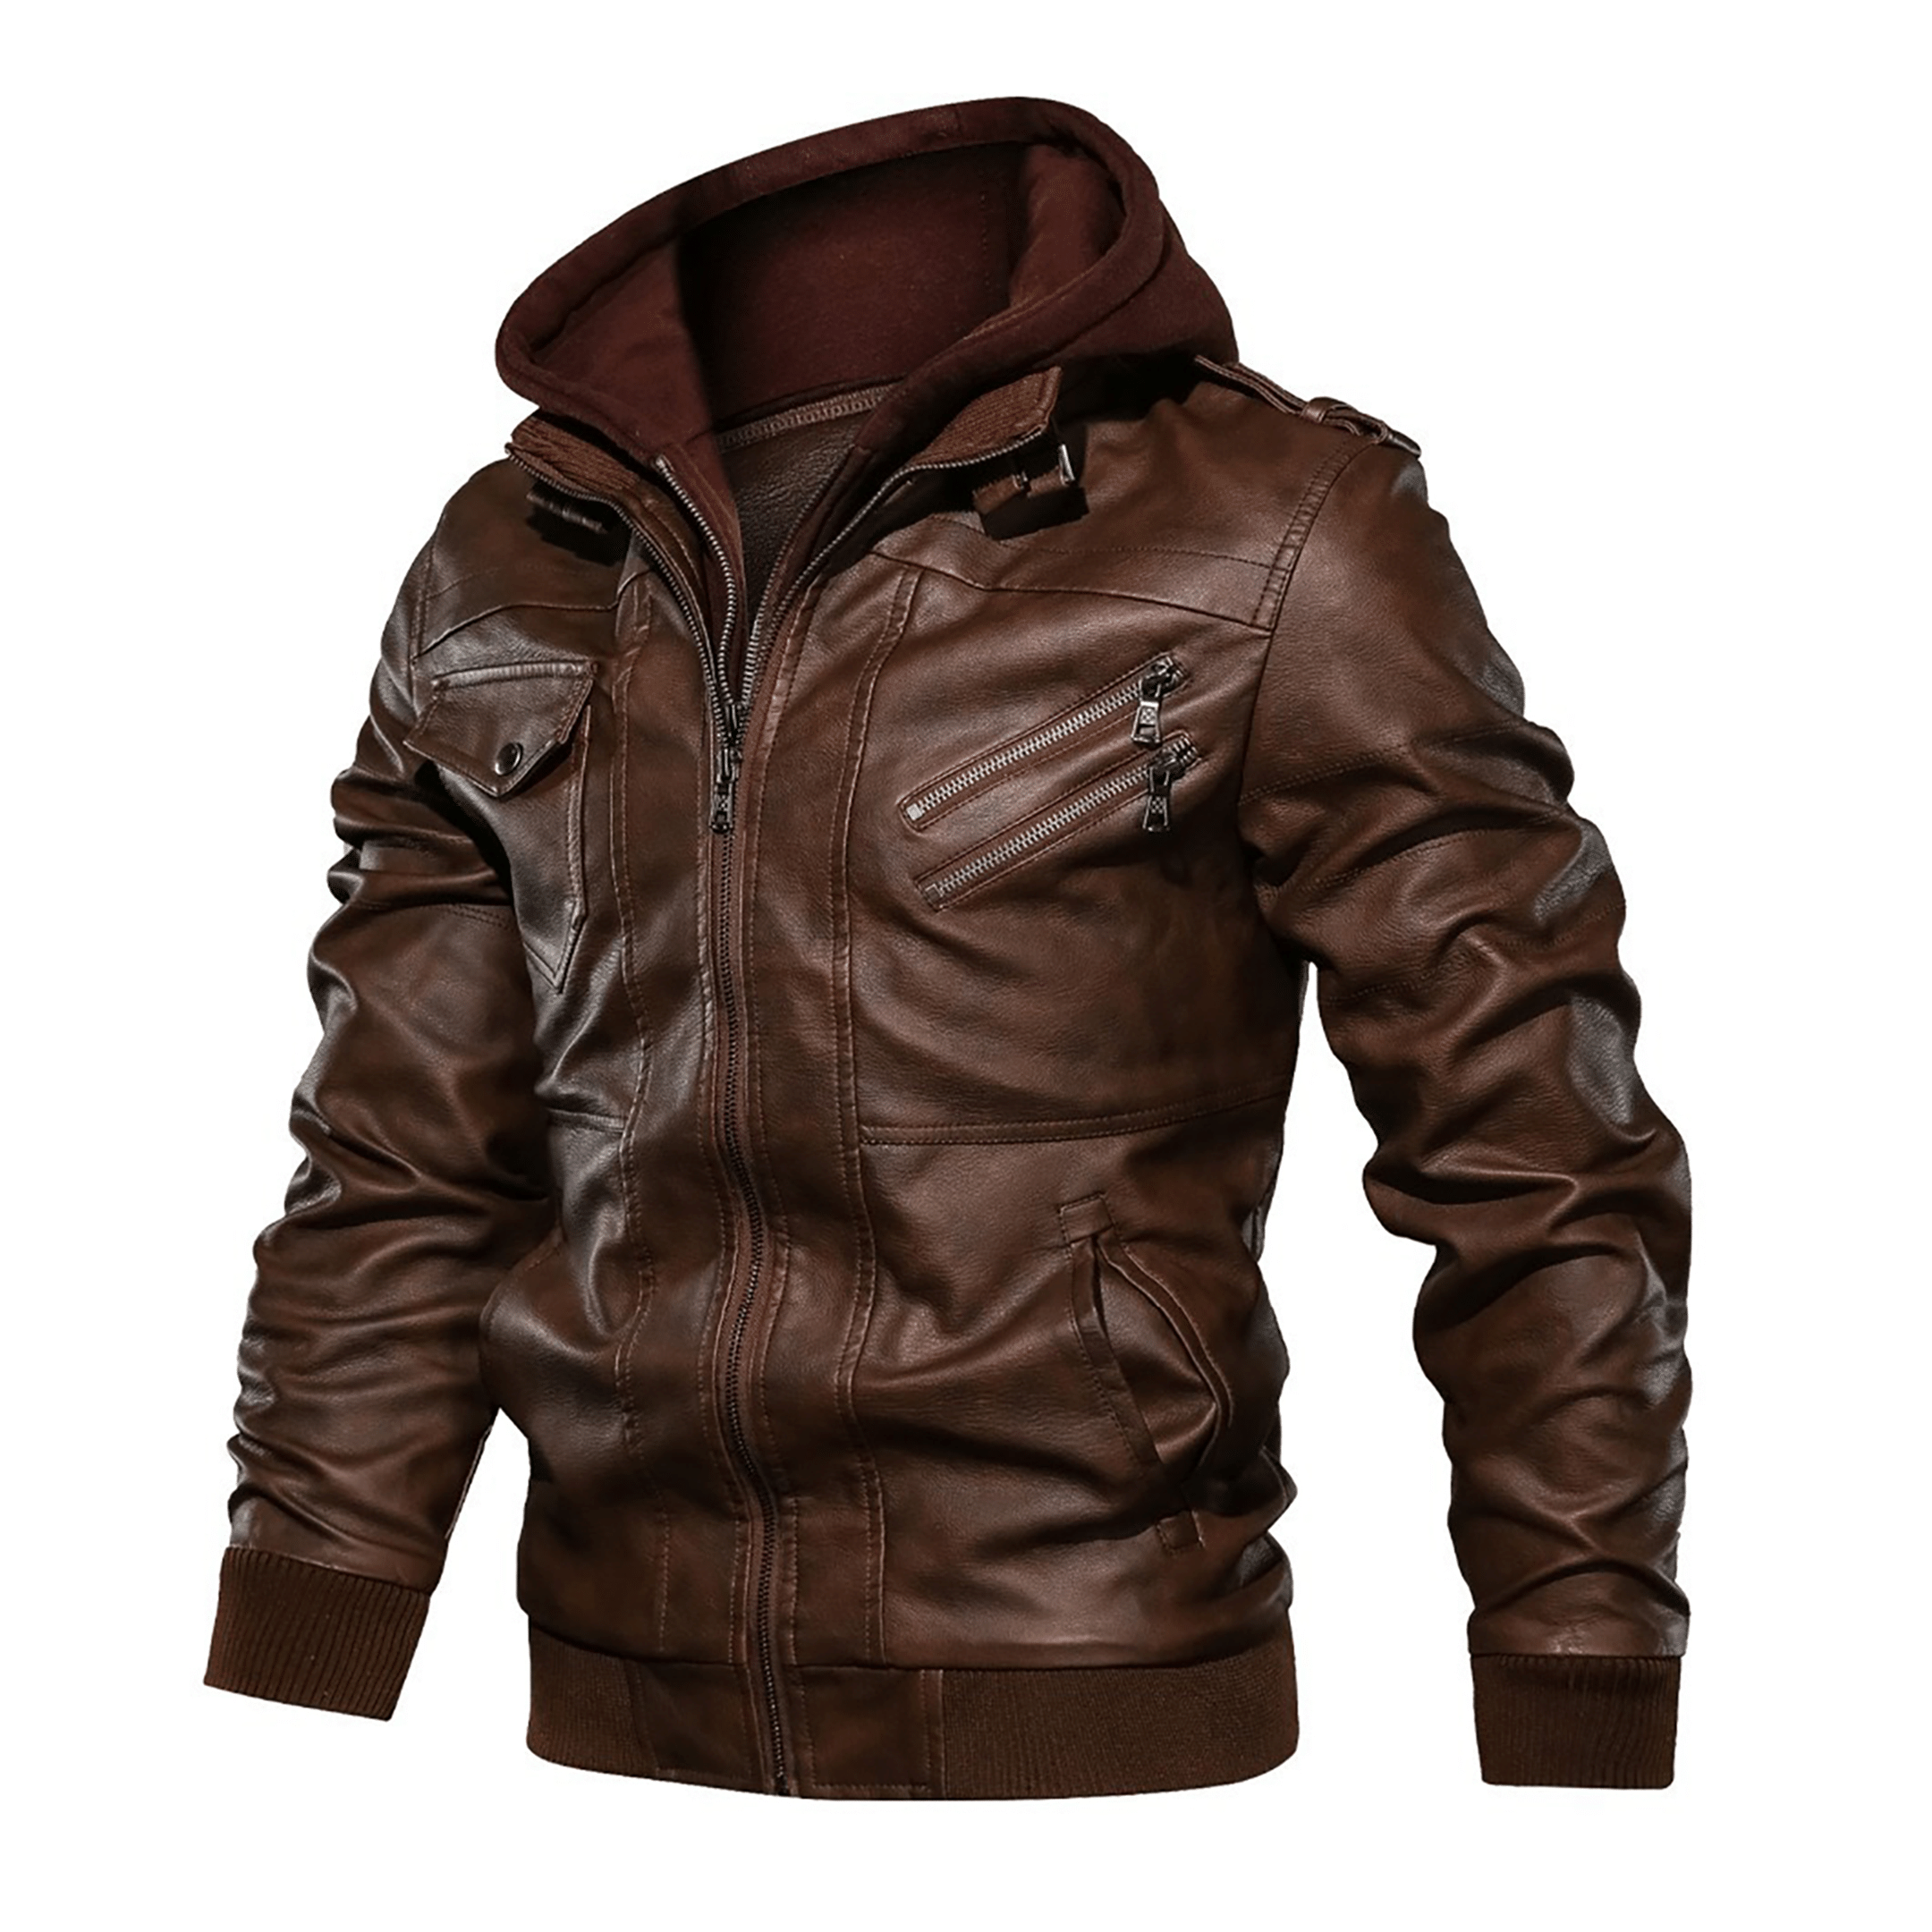 Top leather jackets and latest products 403